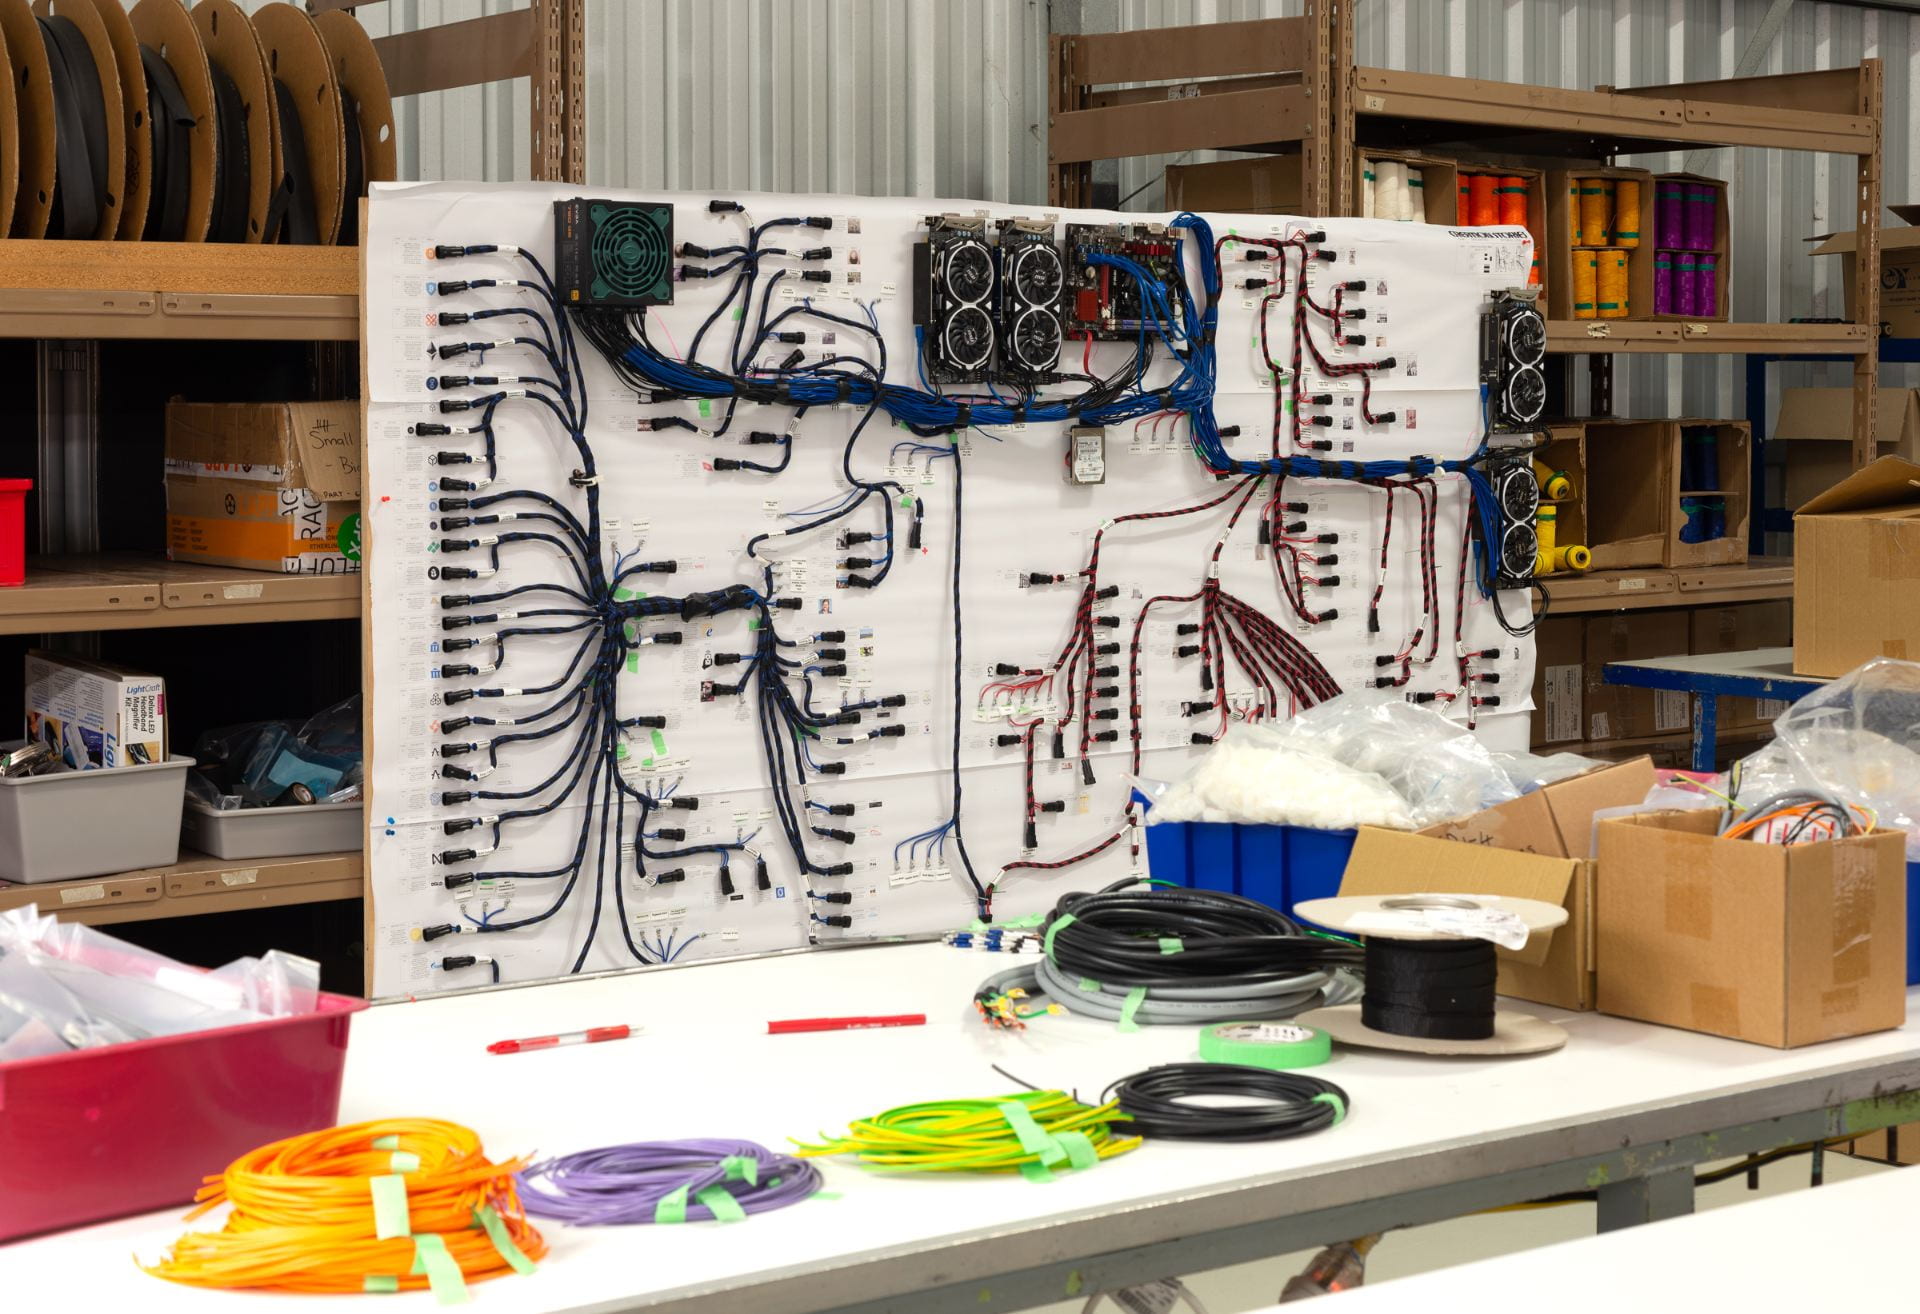 A large white board with a variety of cables running across it sits on top of a work table in a factory, surrounded by coils of cabling.